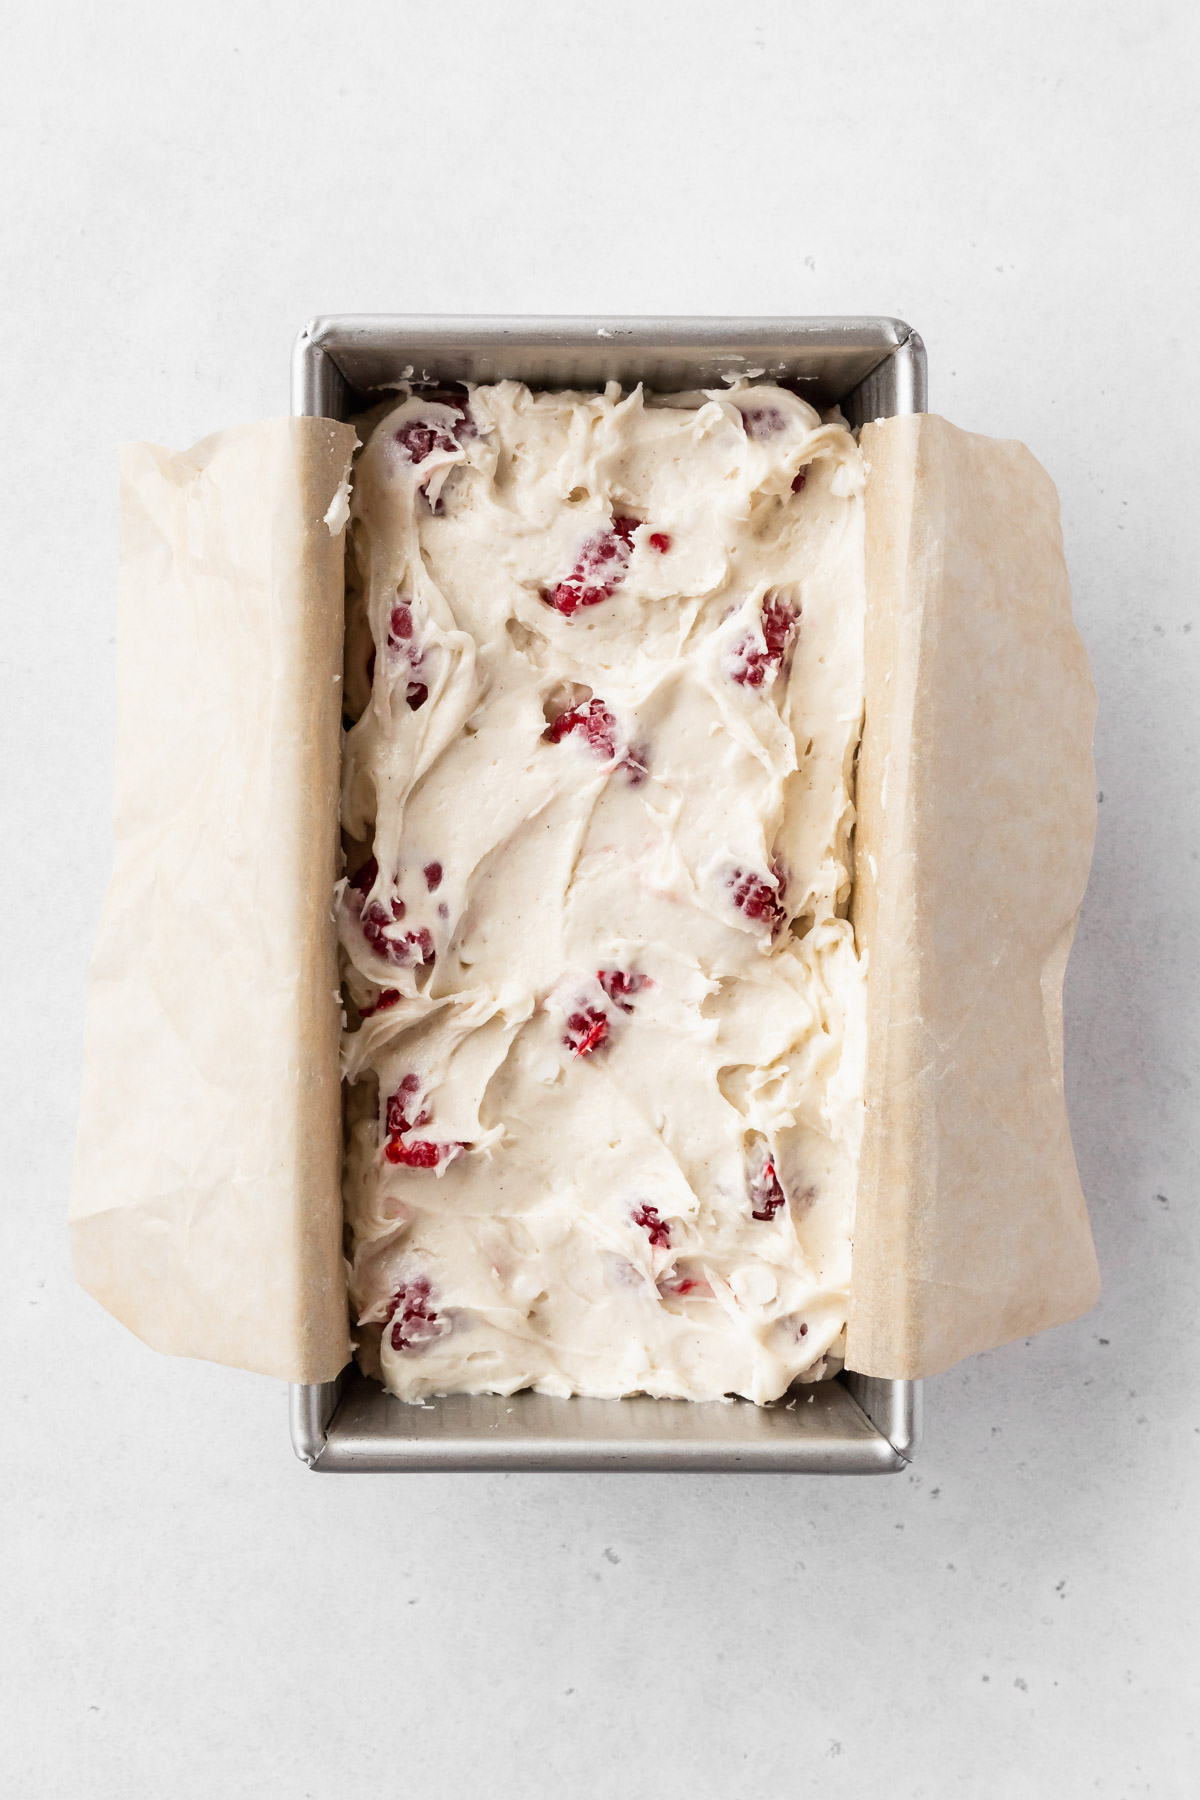 assembled egg-free raspberry white chocolate loaf cake in the baking tin before baking.